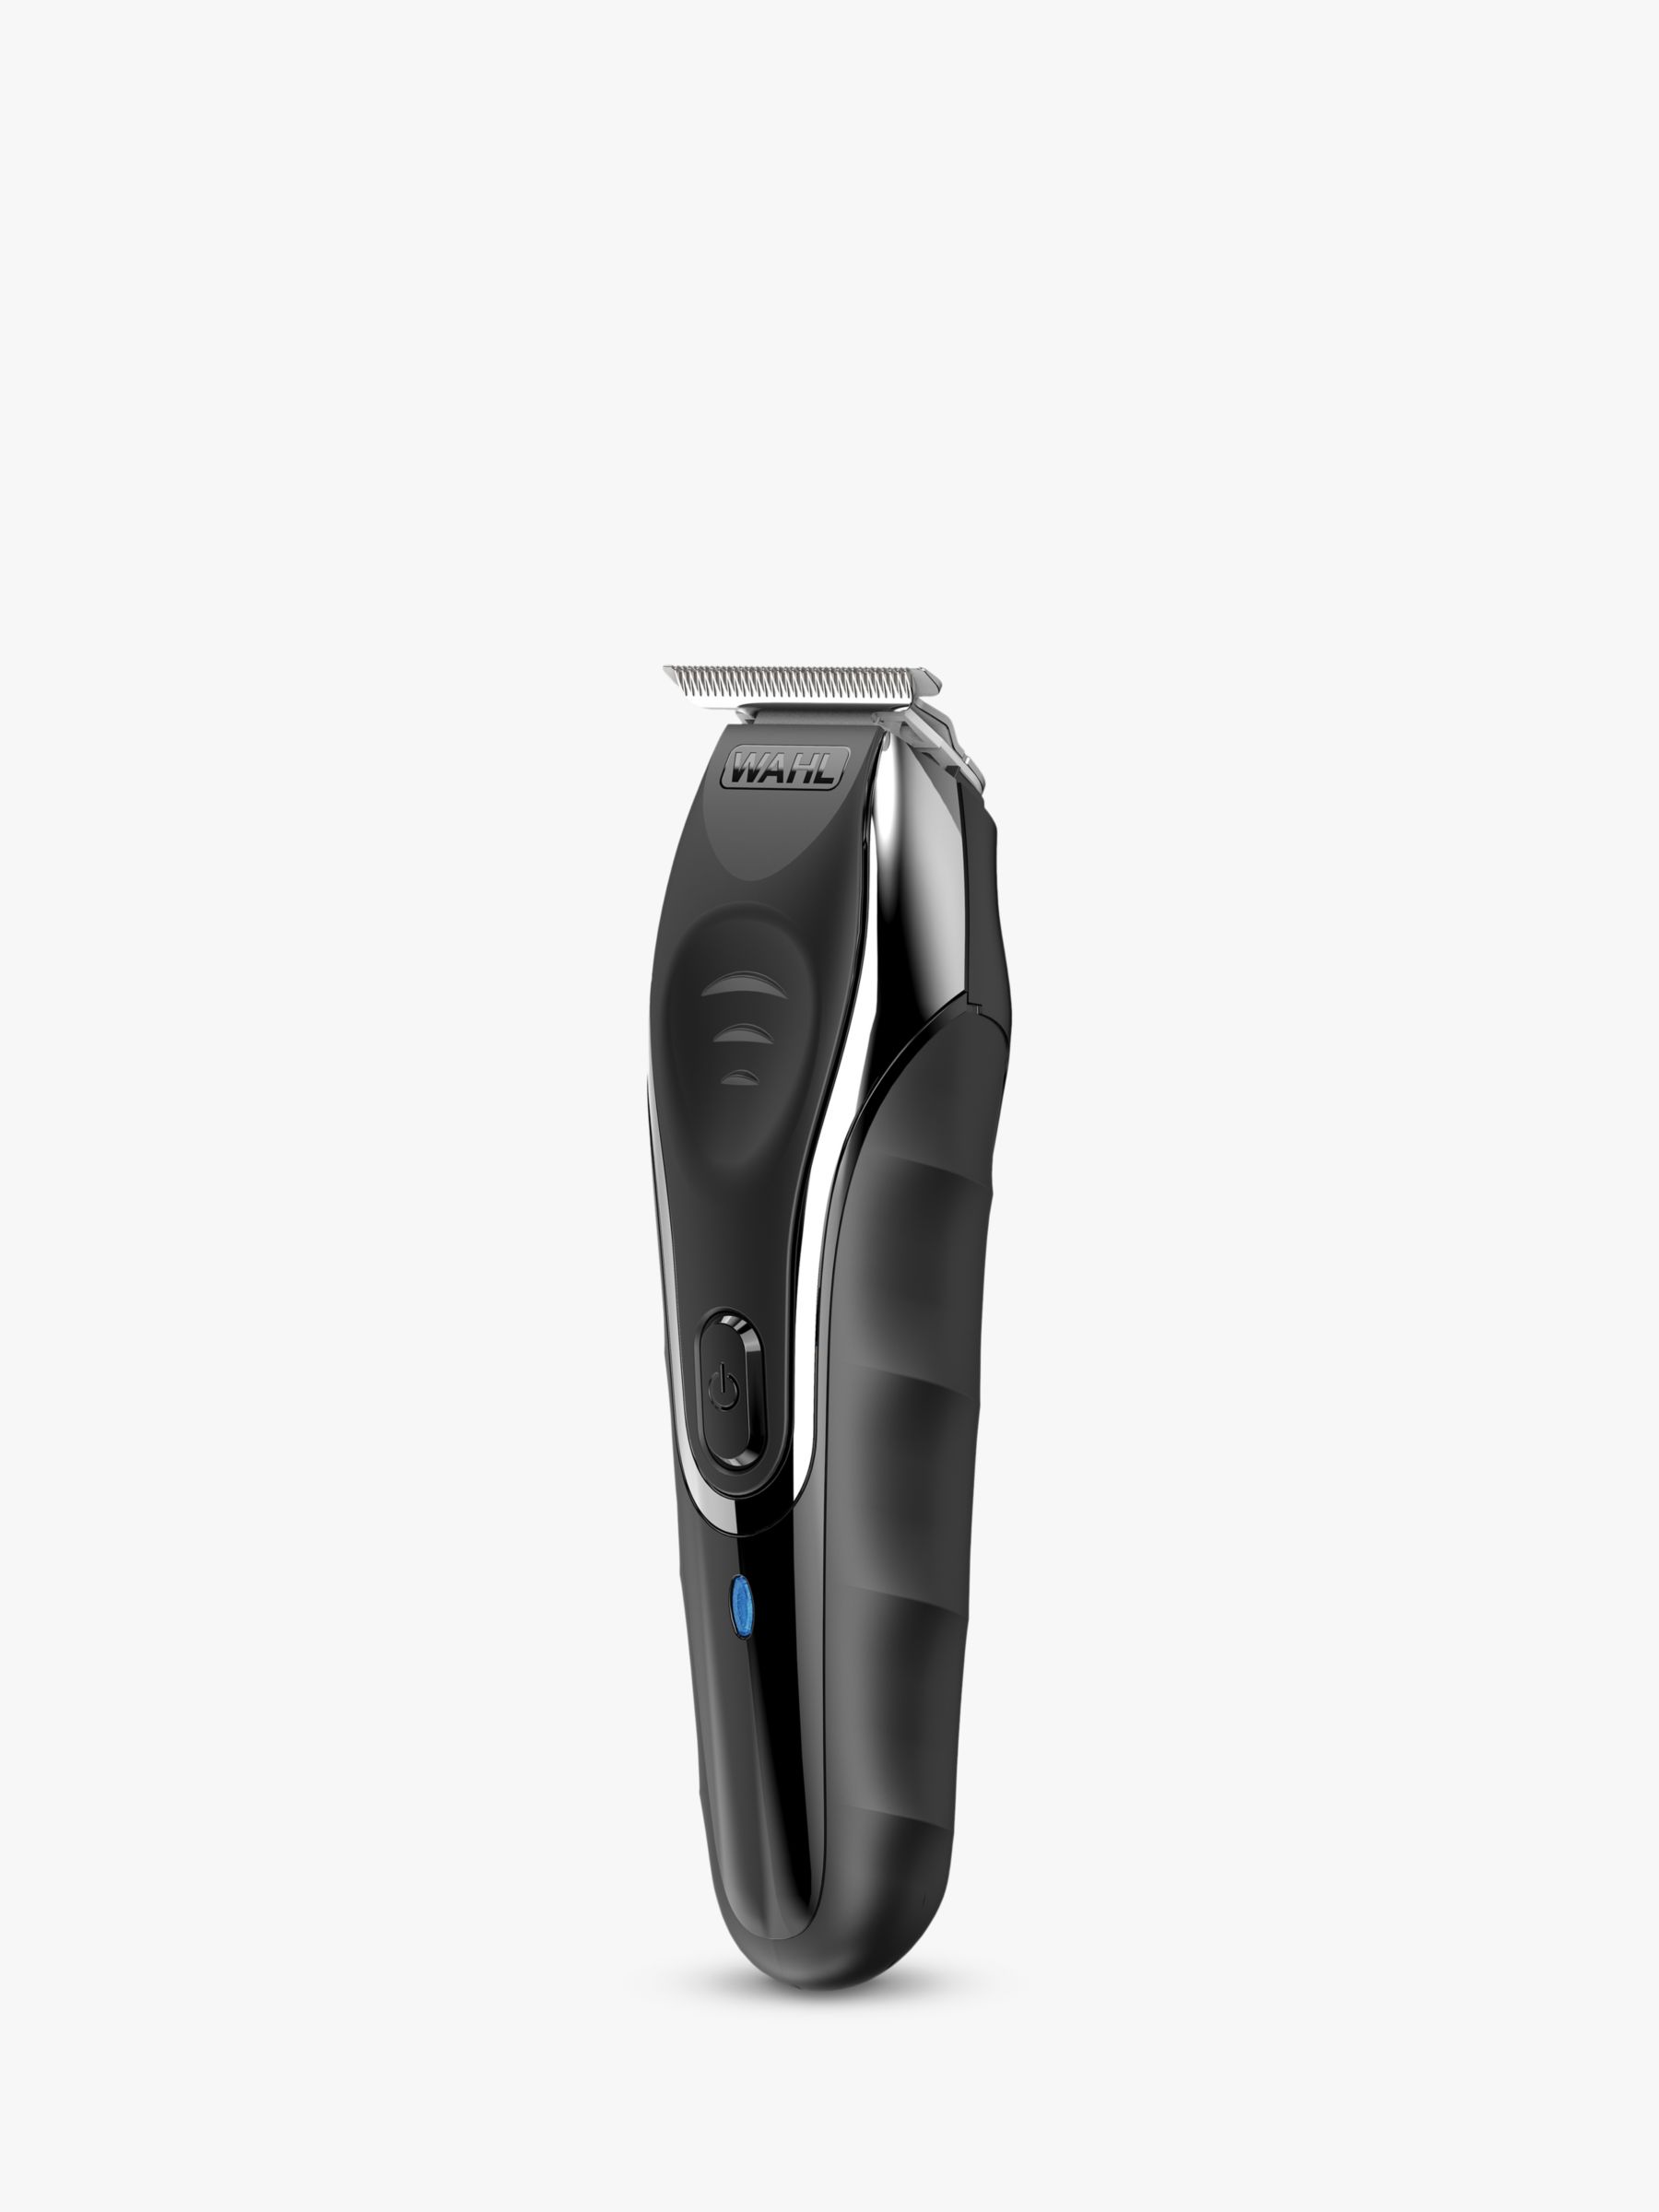 wahl wet and dry trimmer